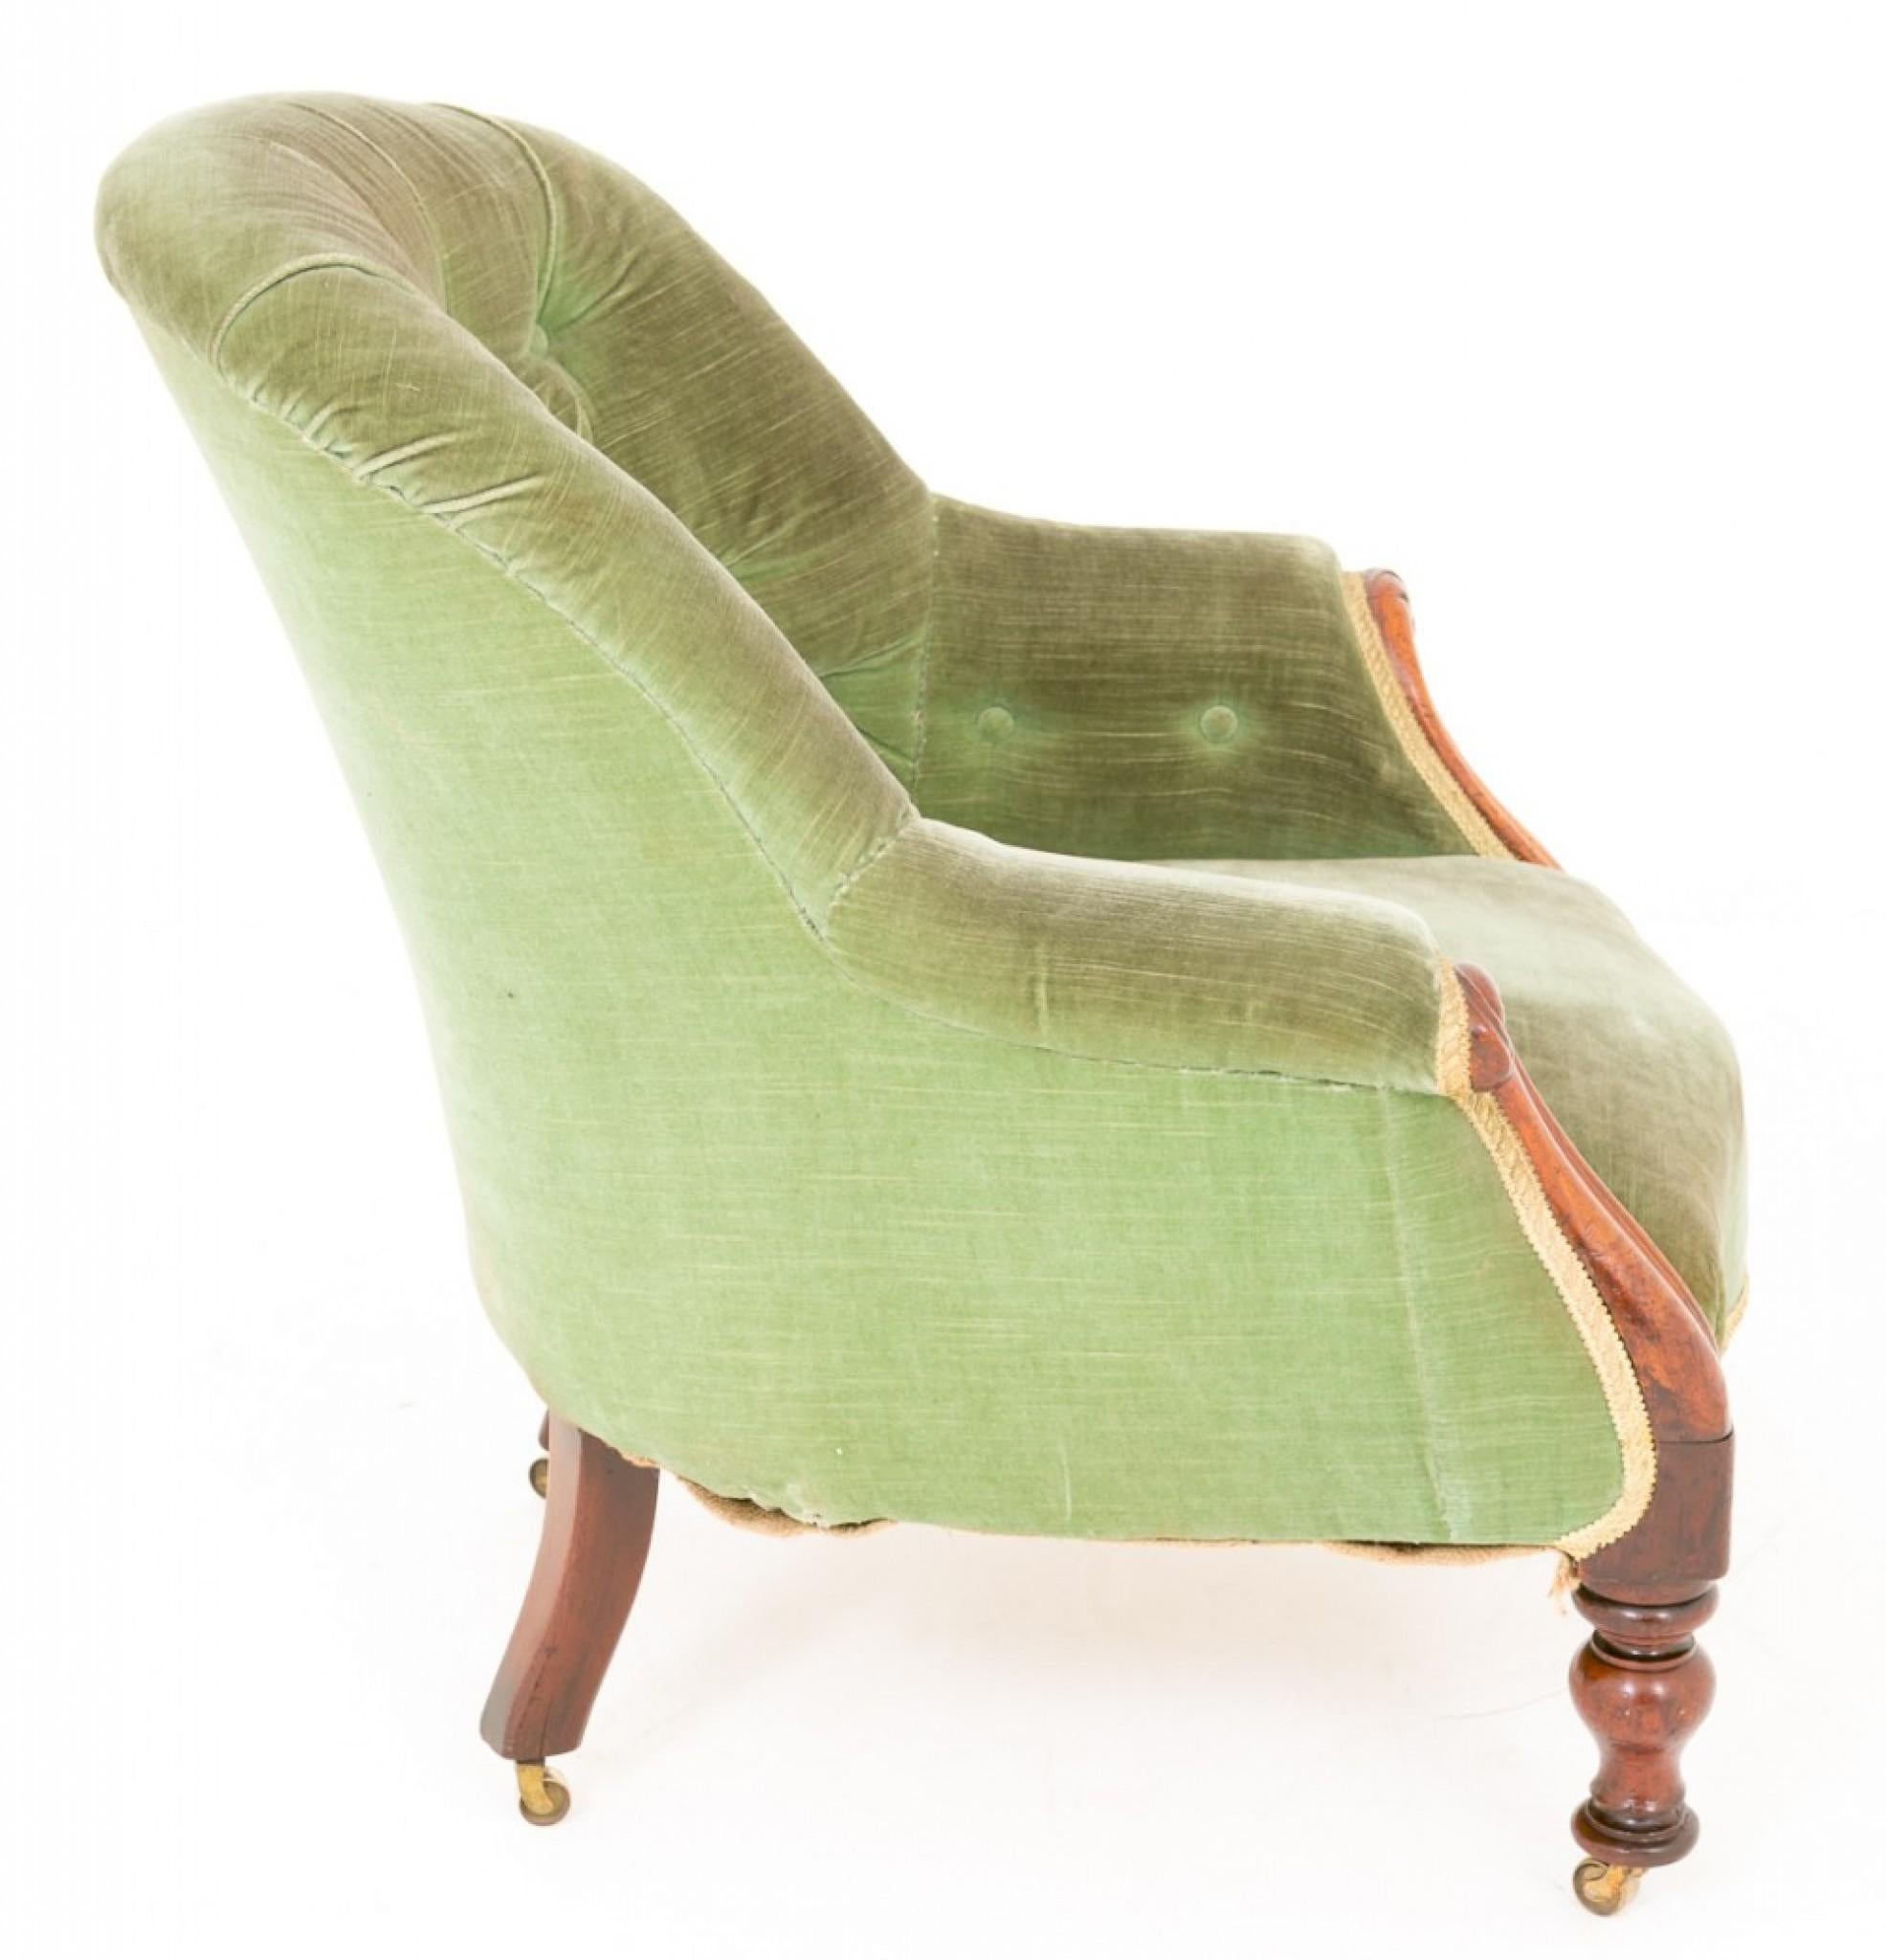 Victorian Mahogany Tub Chair. Having ring turned legs with brass castors.
This chair has swept and carved uprights and is currently covered in a deep buttoned green dralon.
circa 1870
A very pretty and comfortable chair.